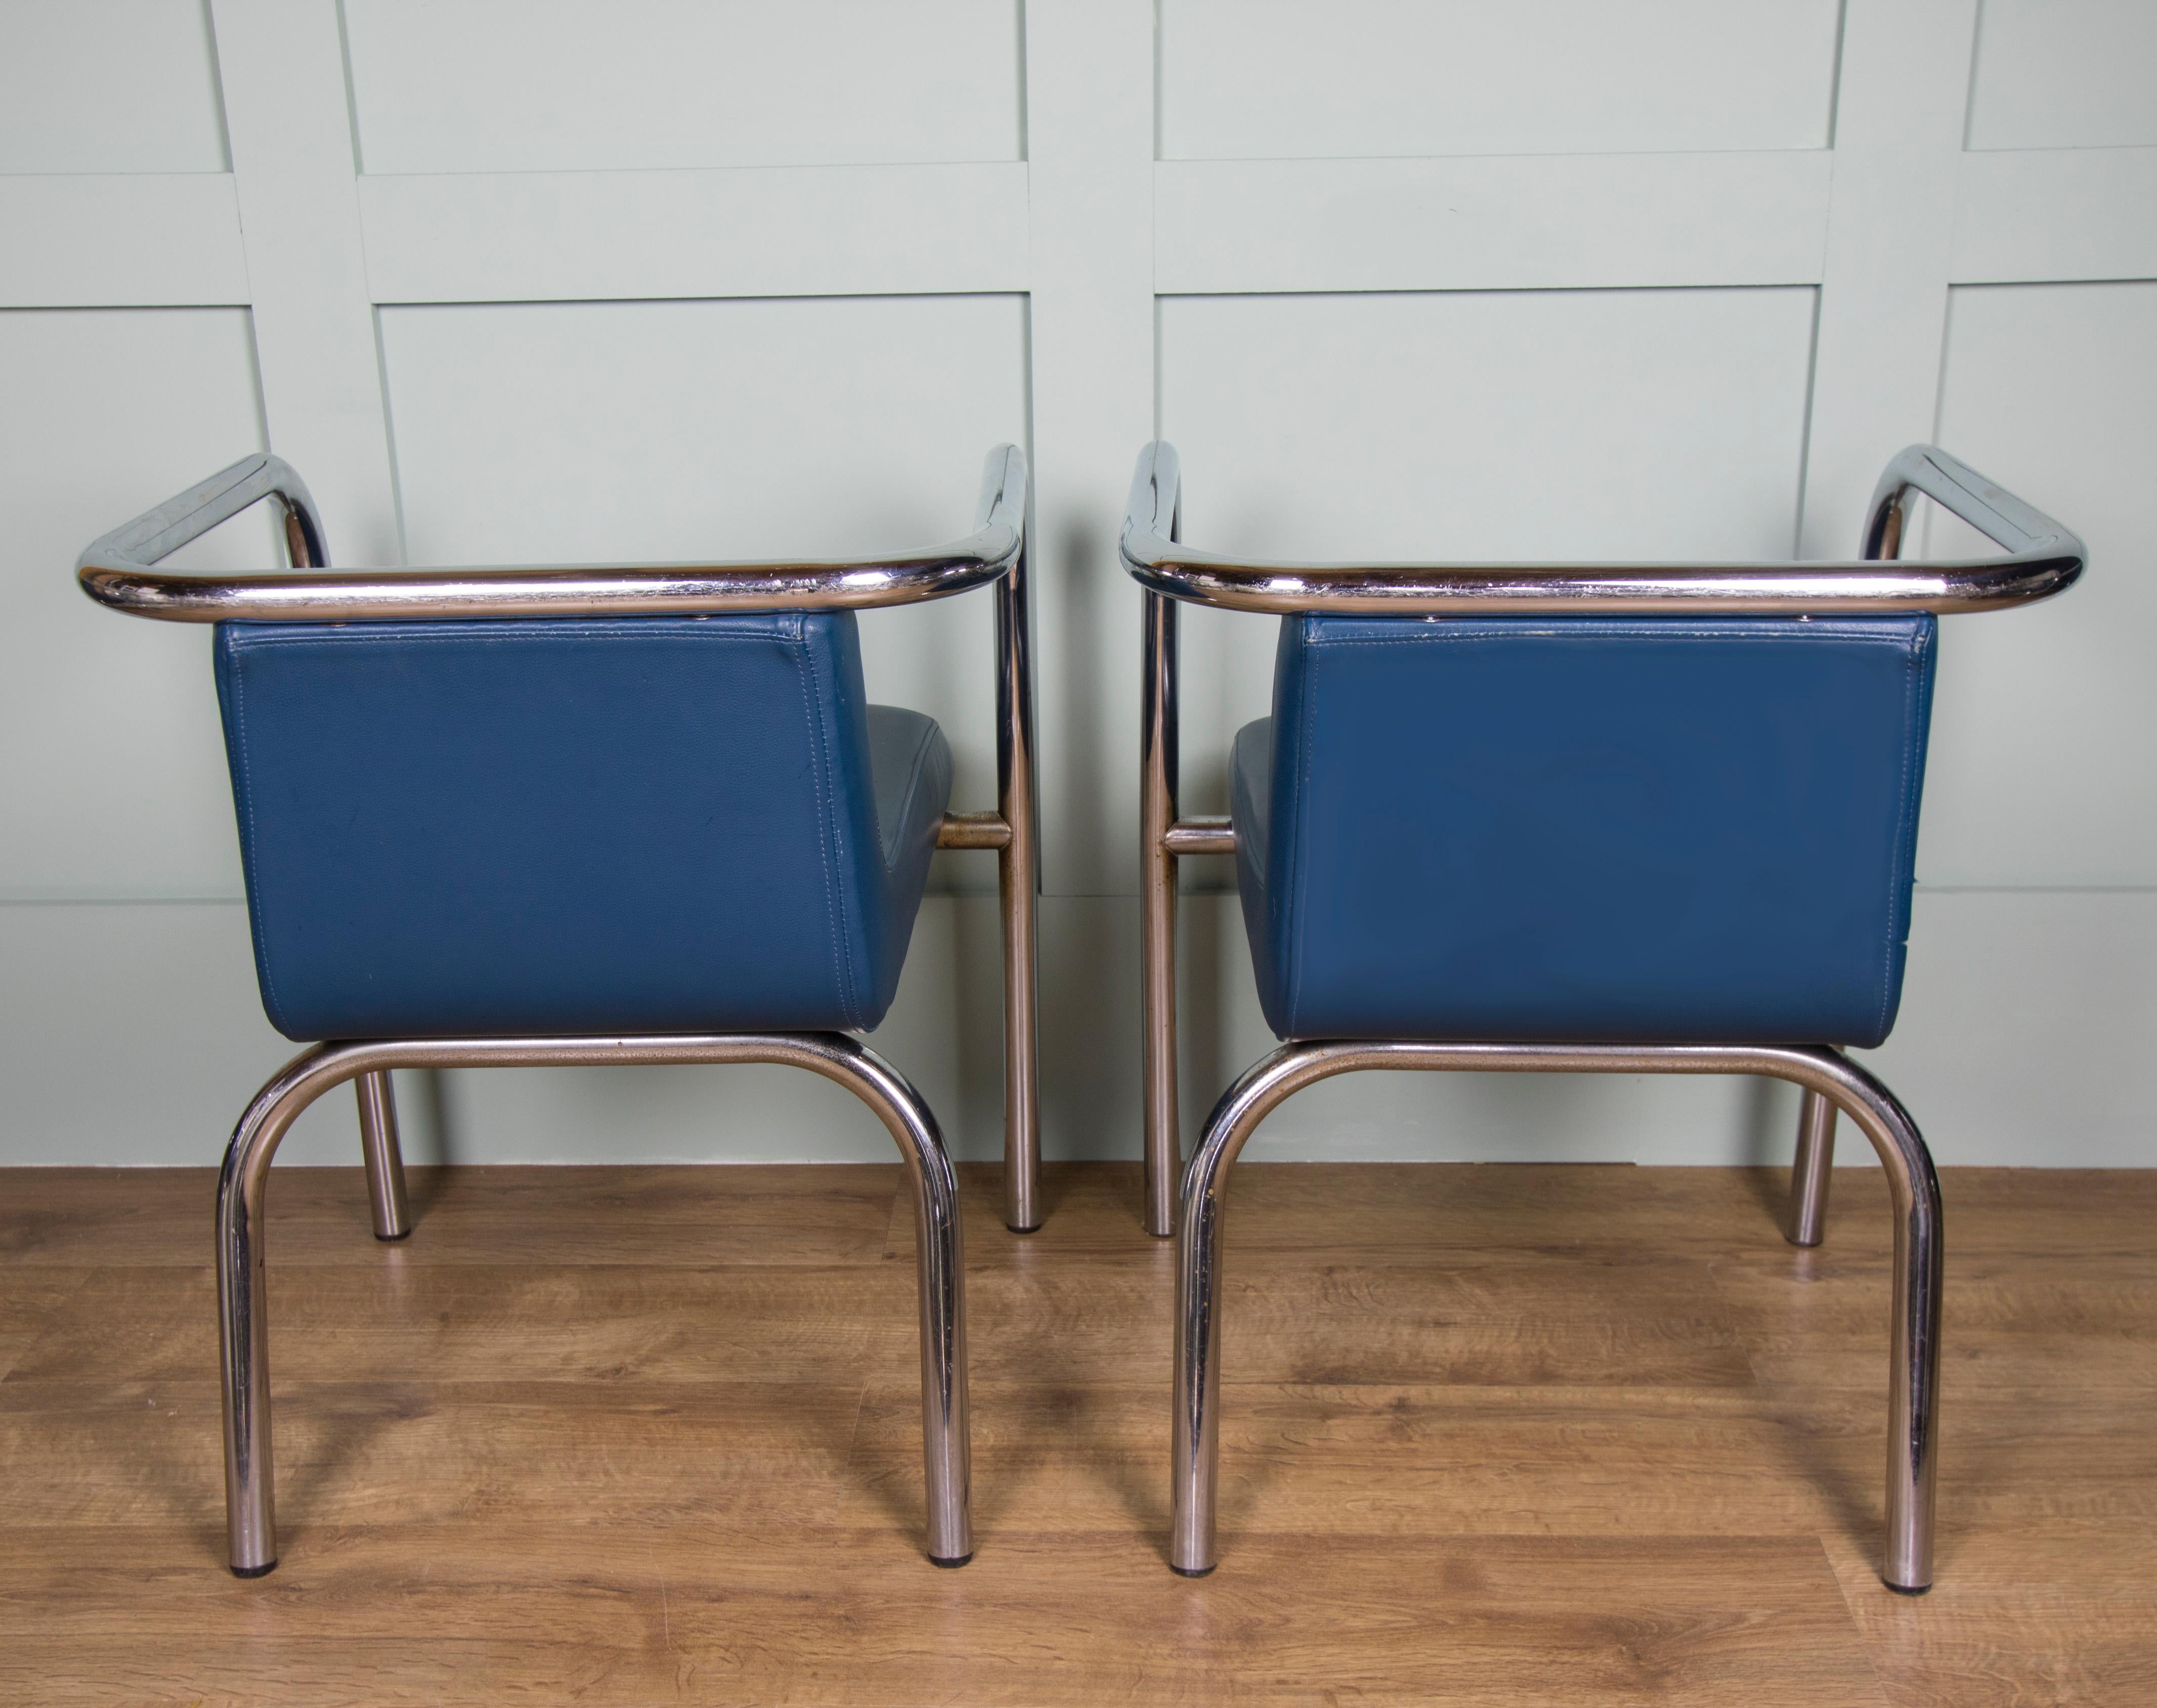 This set of six chairs made from tubular steel frames and upholstered with soft royal blue leather seats. These chairs have low backs with comfortable padded seats. There is some patina to the frames as they are original, believed to date from